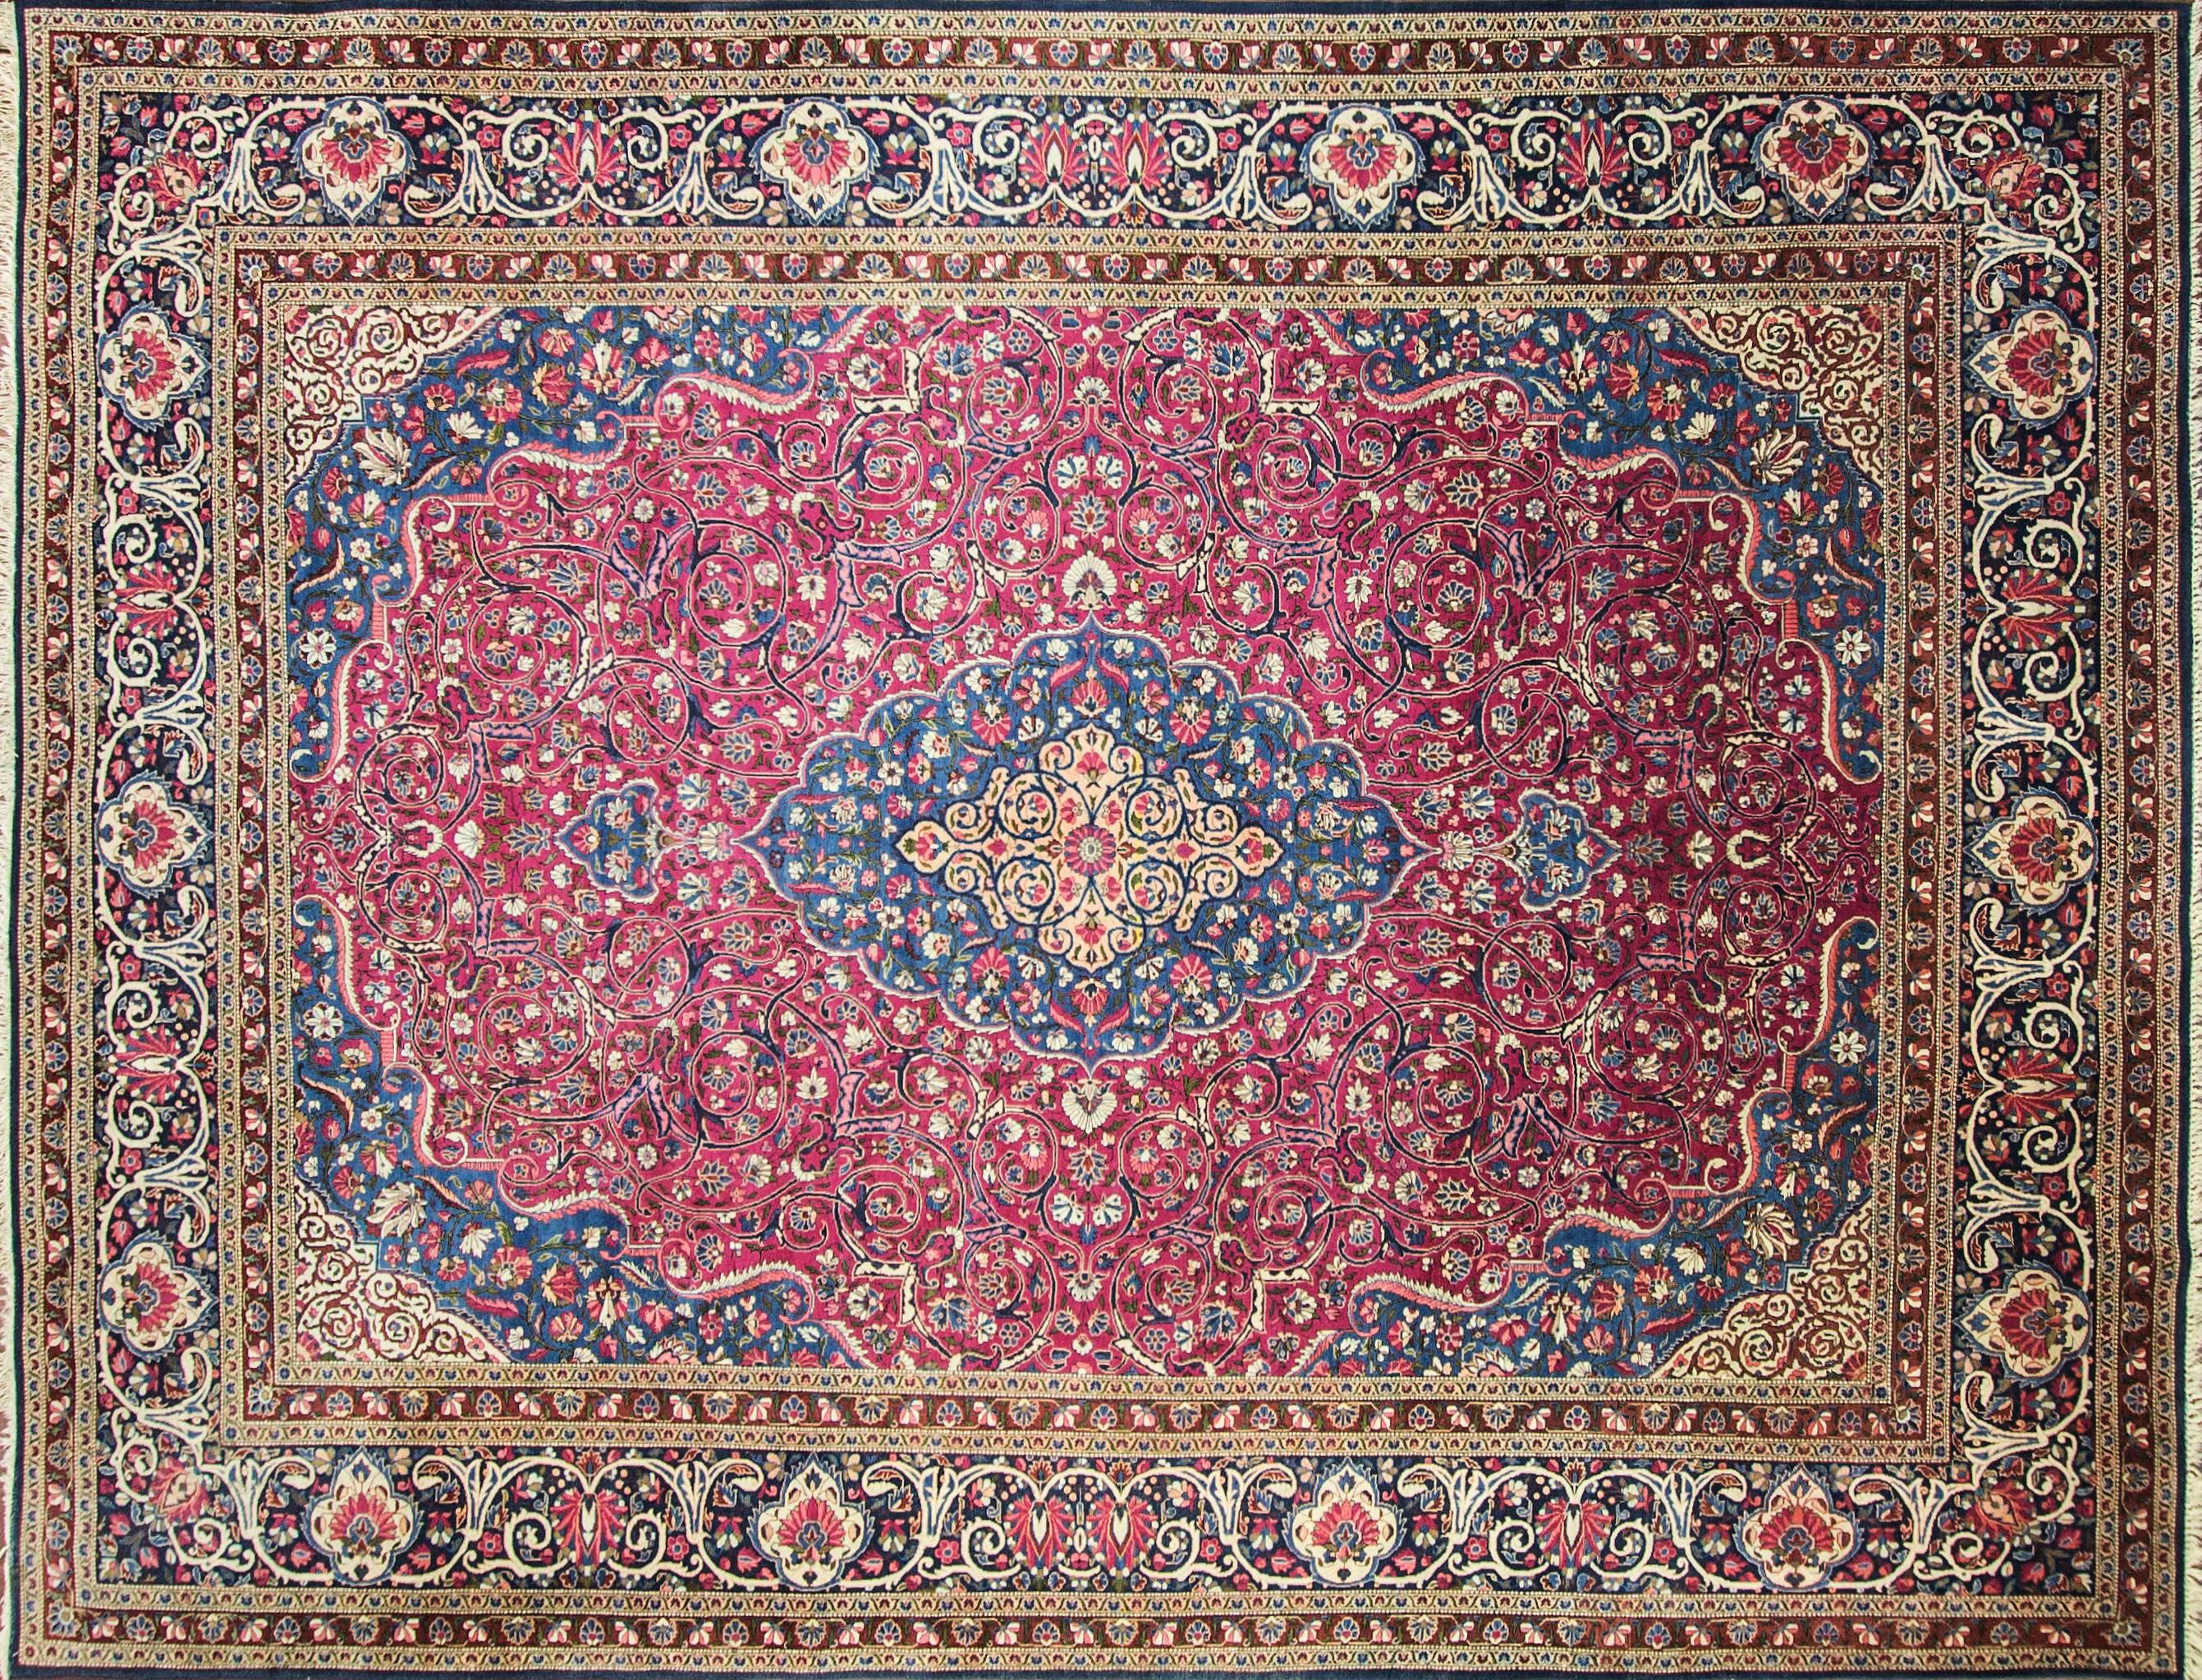 Very fine Persian Dabir Kashan in perfect condition, circa 1920.
Unusual purple red background color.
High density knotting woven from kork wool, creating an intricate design.
From the mid-19th to the early 20th century the finest quality rugs